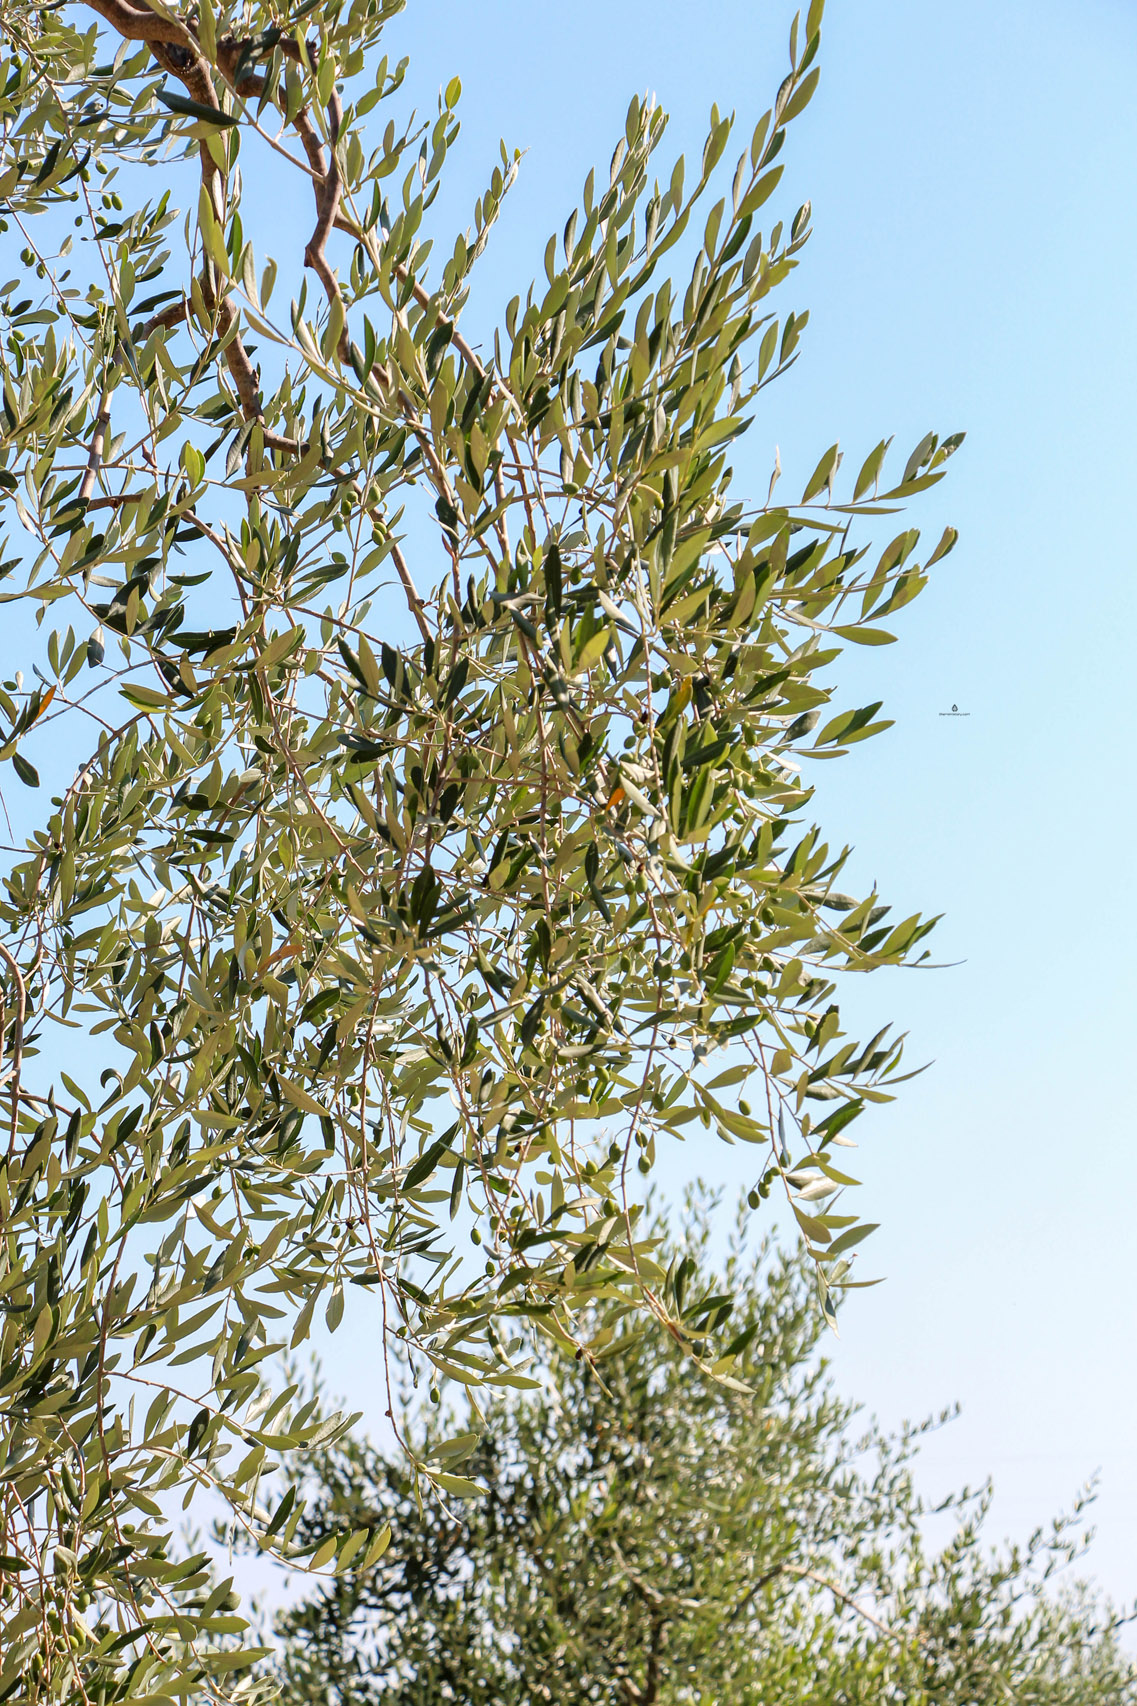 Olive leaves near Vieste, Italy